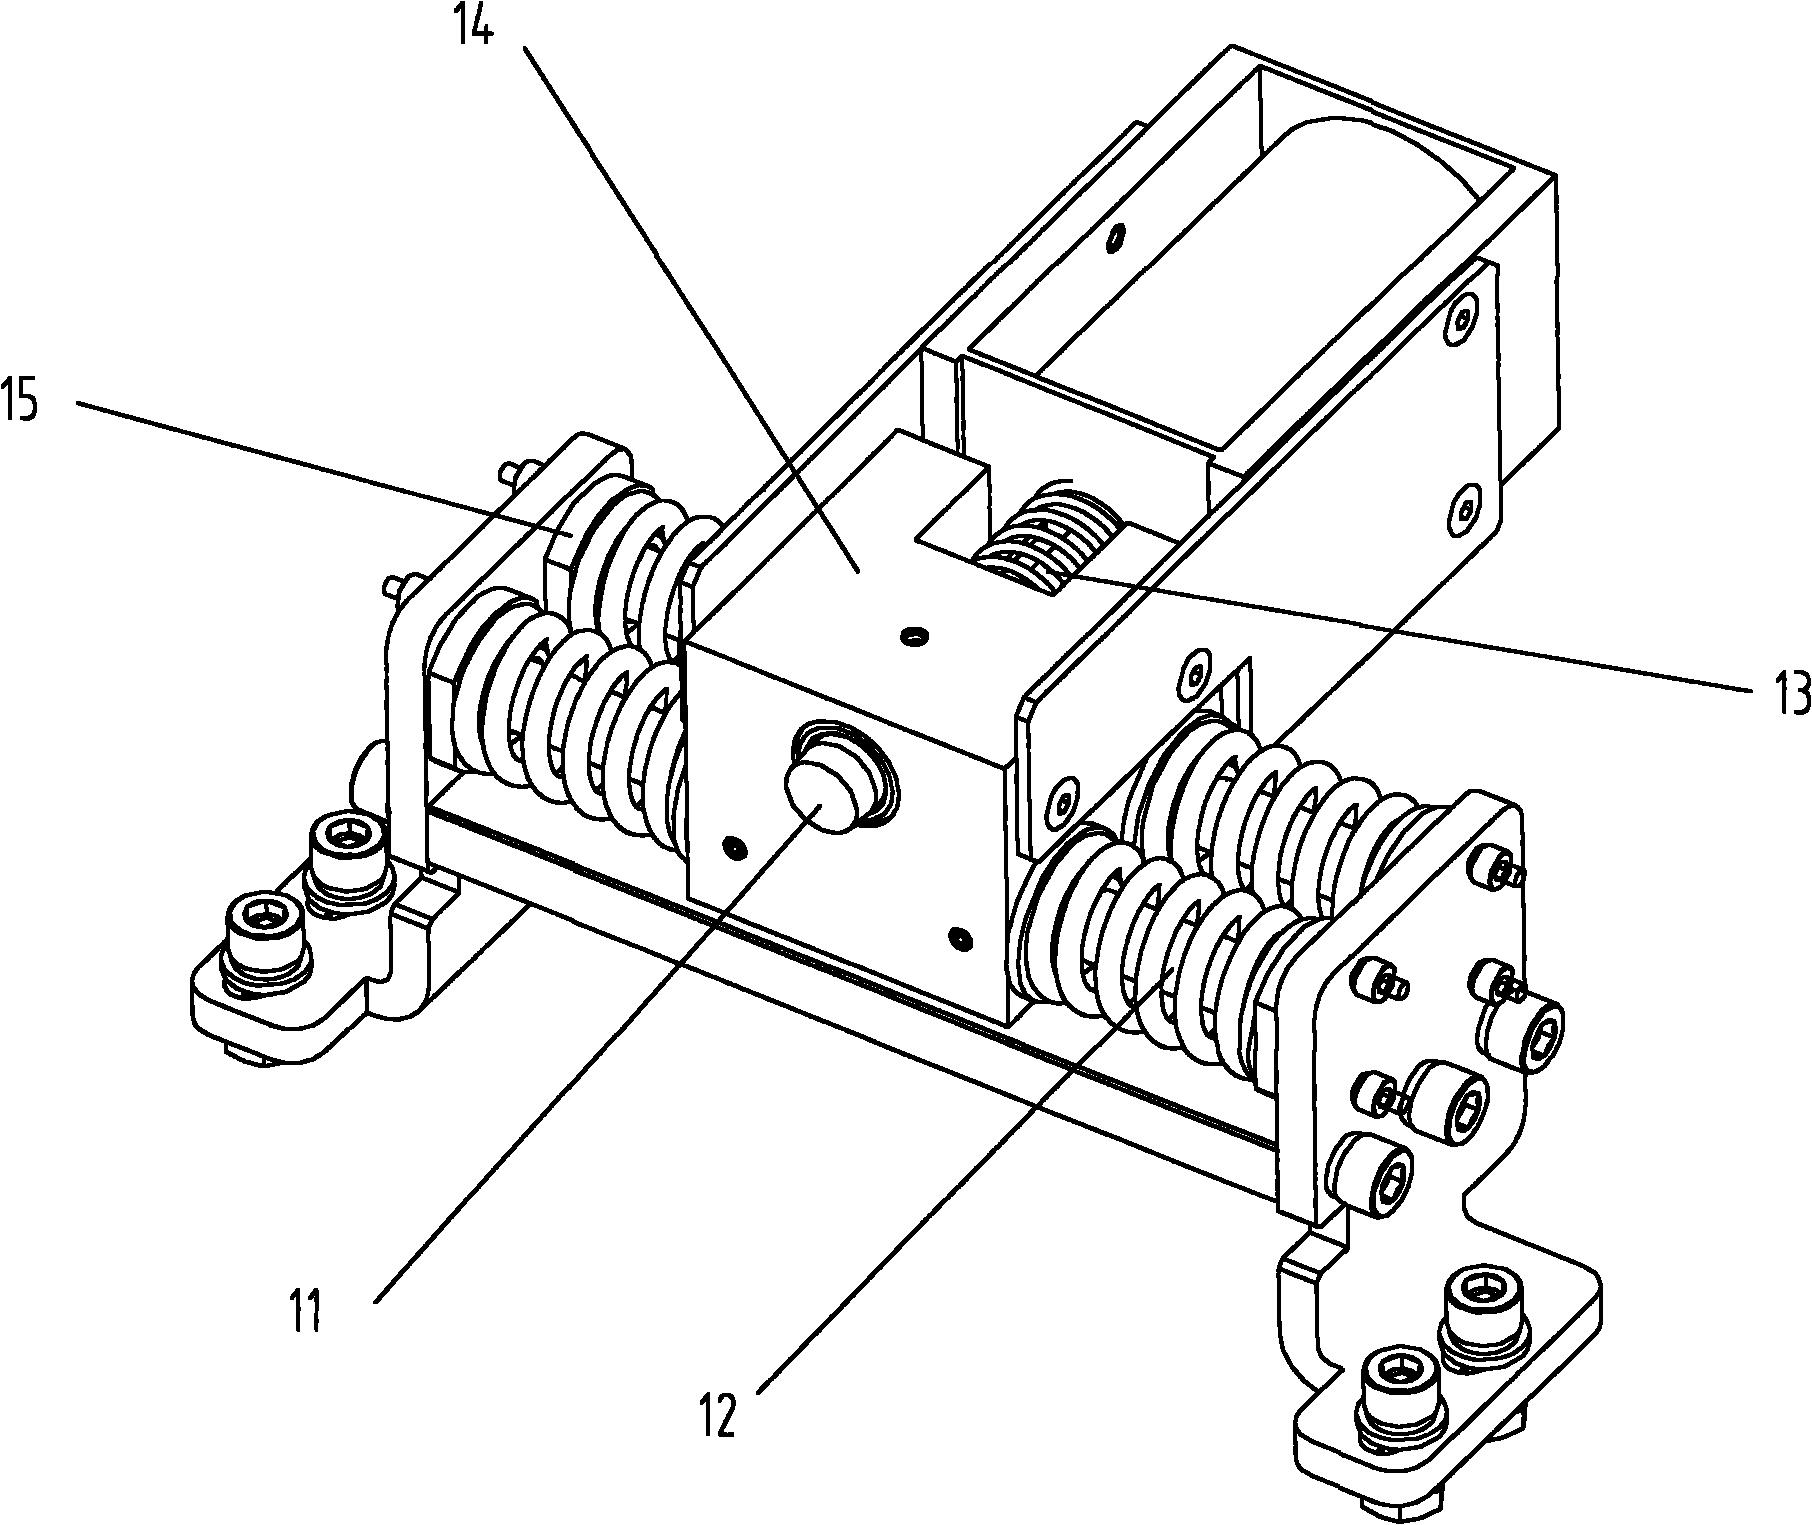 Positioning system of suspended medical device